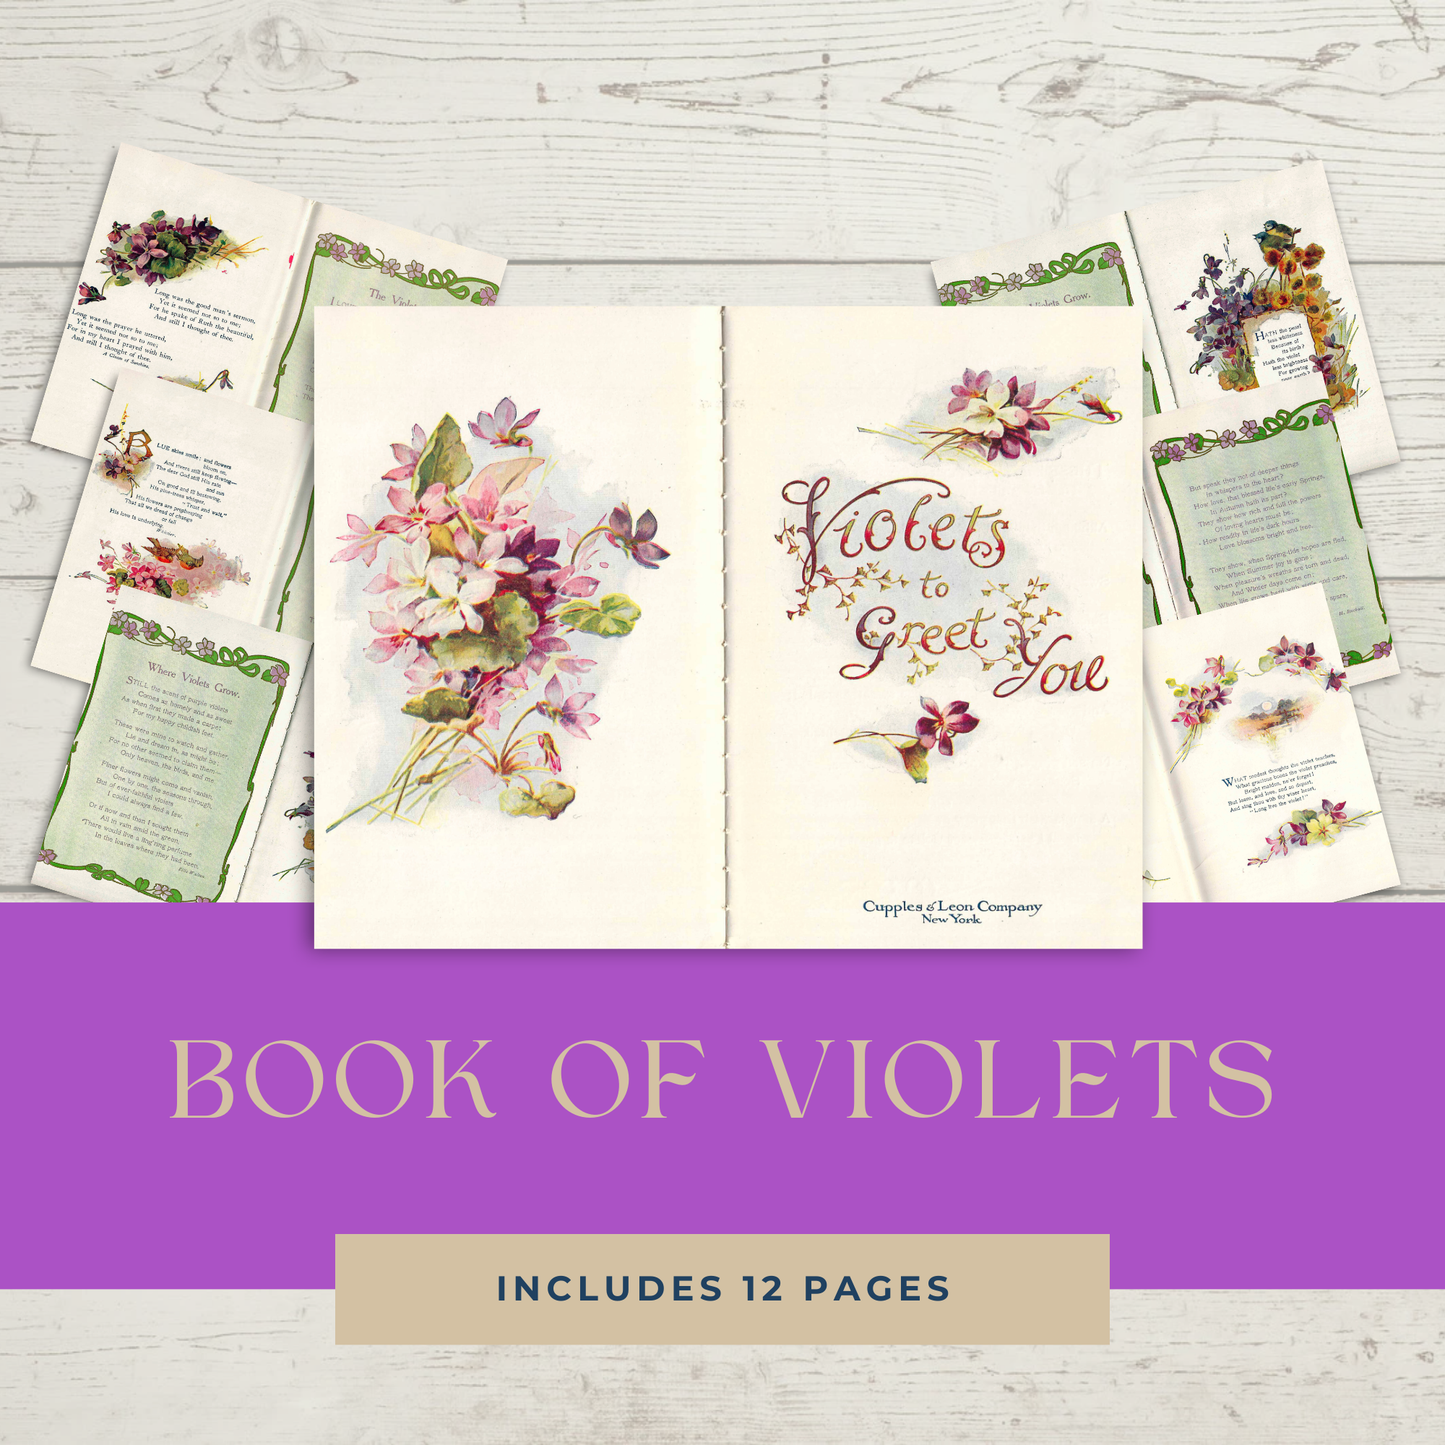 Victorian Poetry from 1914  illustrated with color paintings, Book of Violets, DIY Junk Journal or Mini Album Kit, Collage Papers | Digital Download